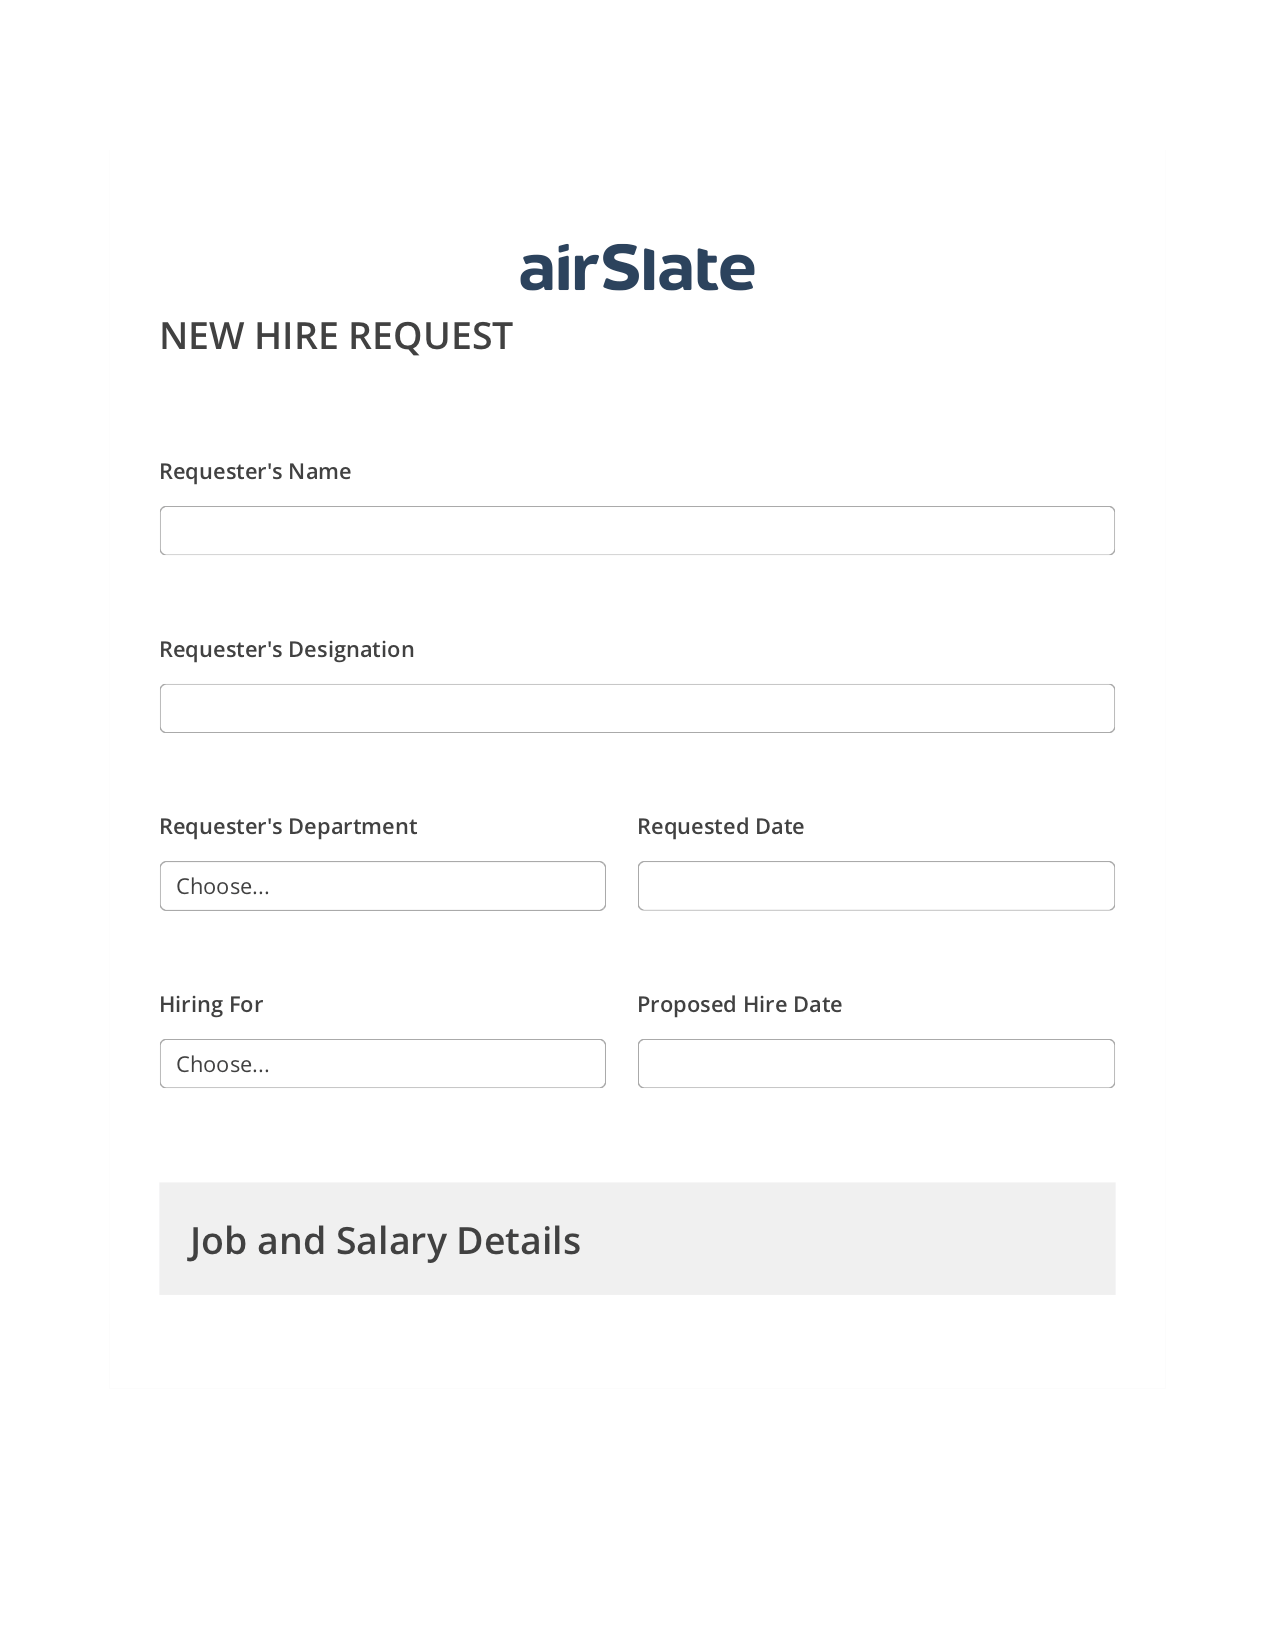 Hiring Request Workflow Pre-fill from Salesforce Records Bot, Remove Tags From Slate Bot, Export to Smartsheet